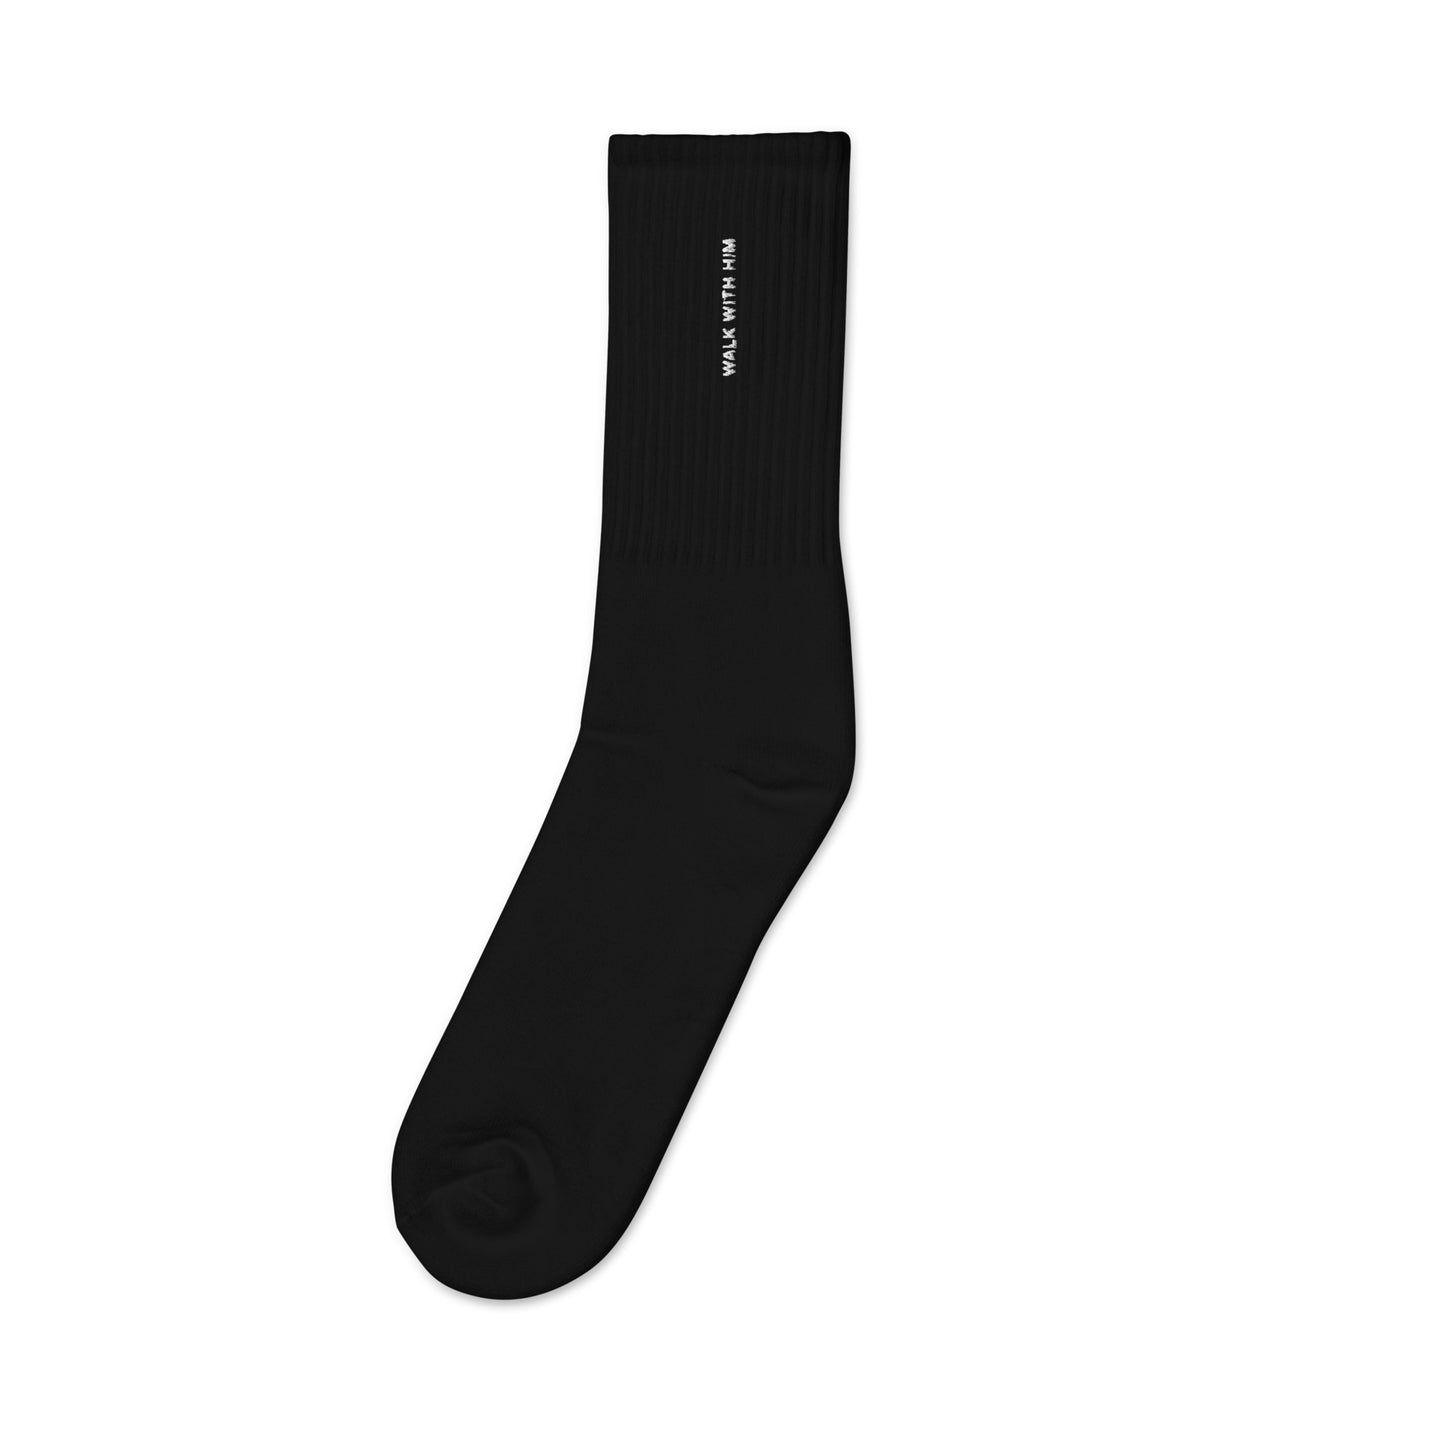 Walk With Him Black Embroidered socks